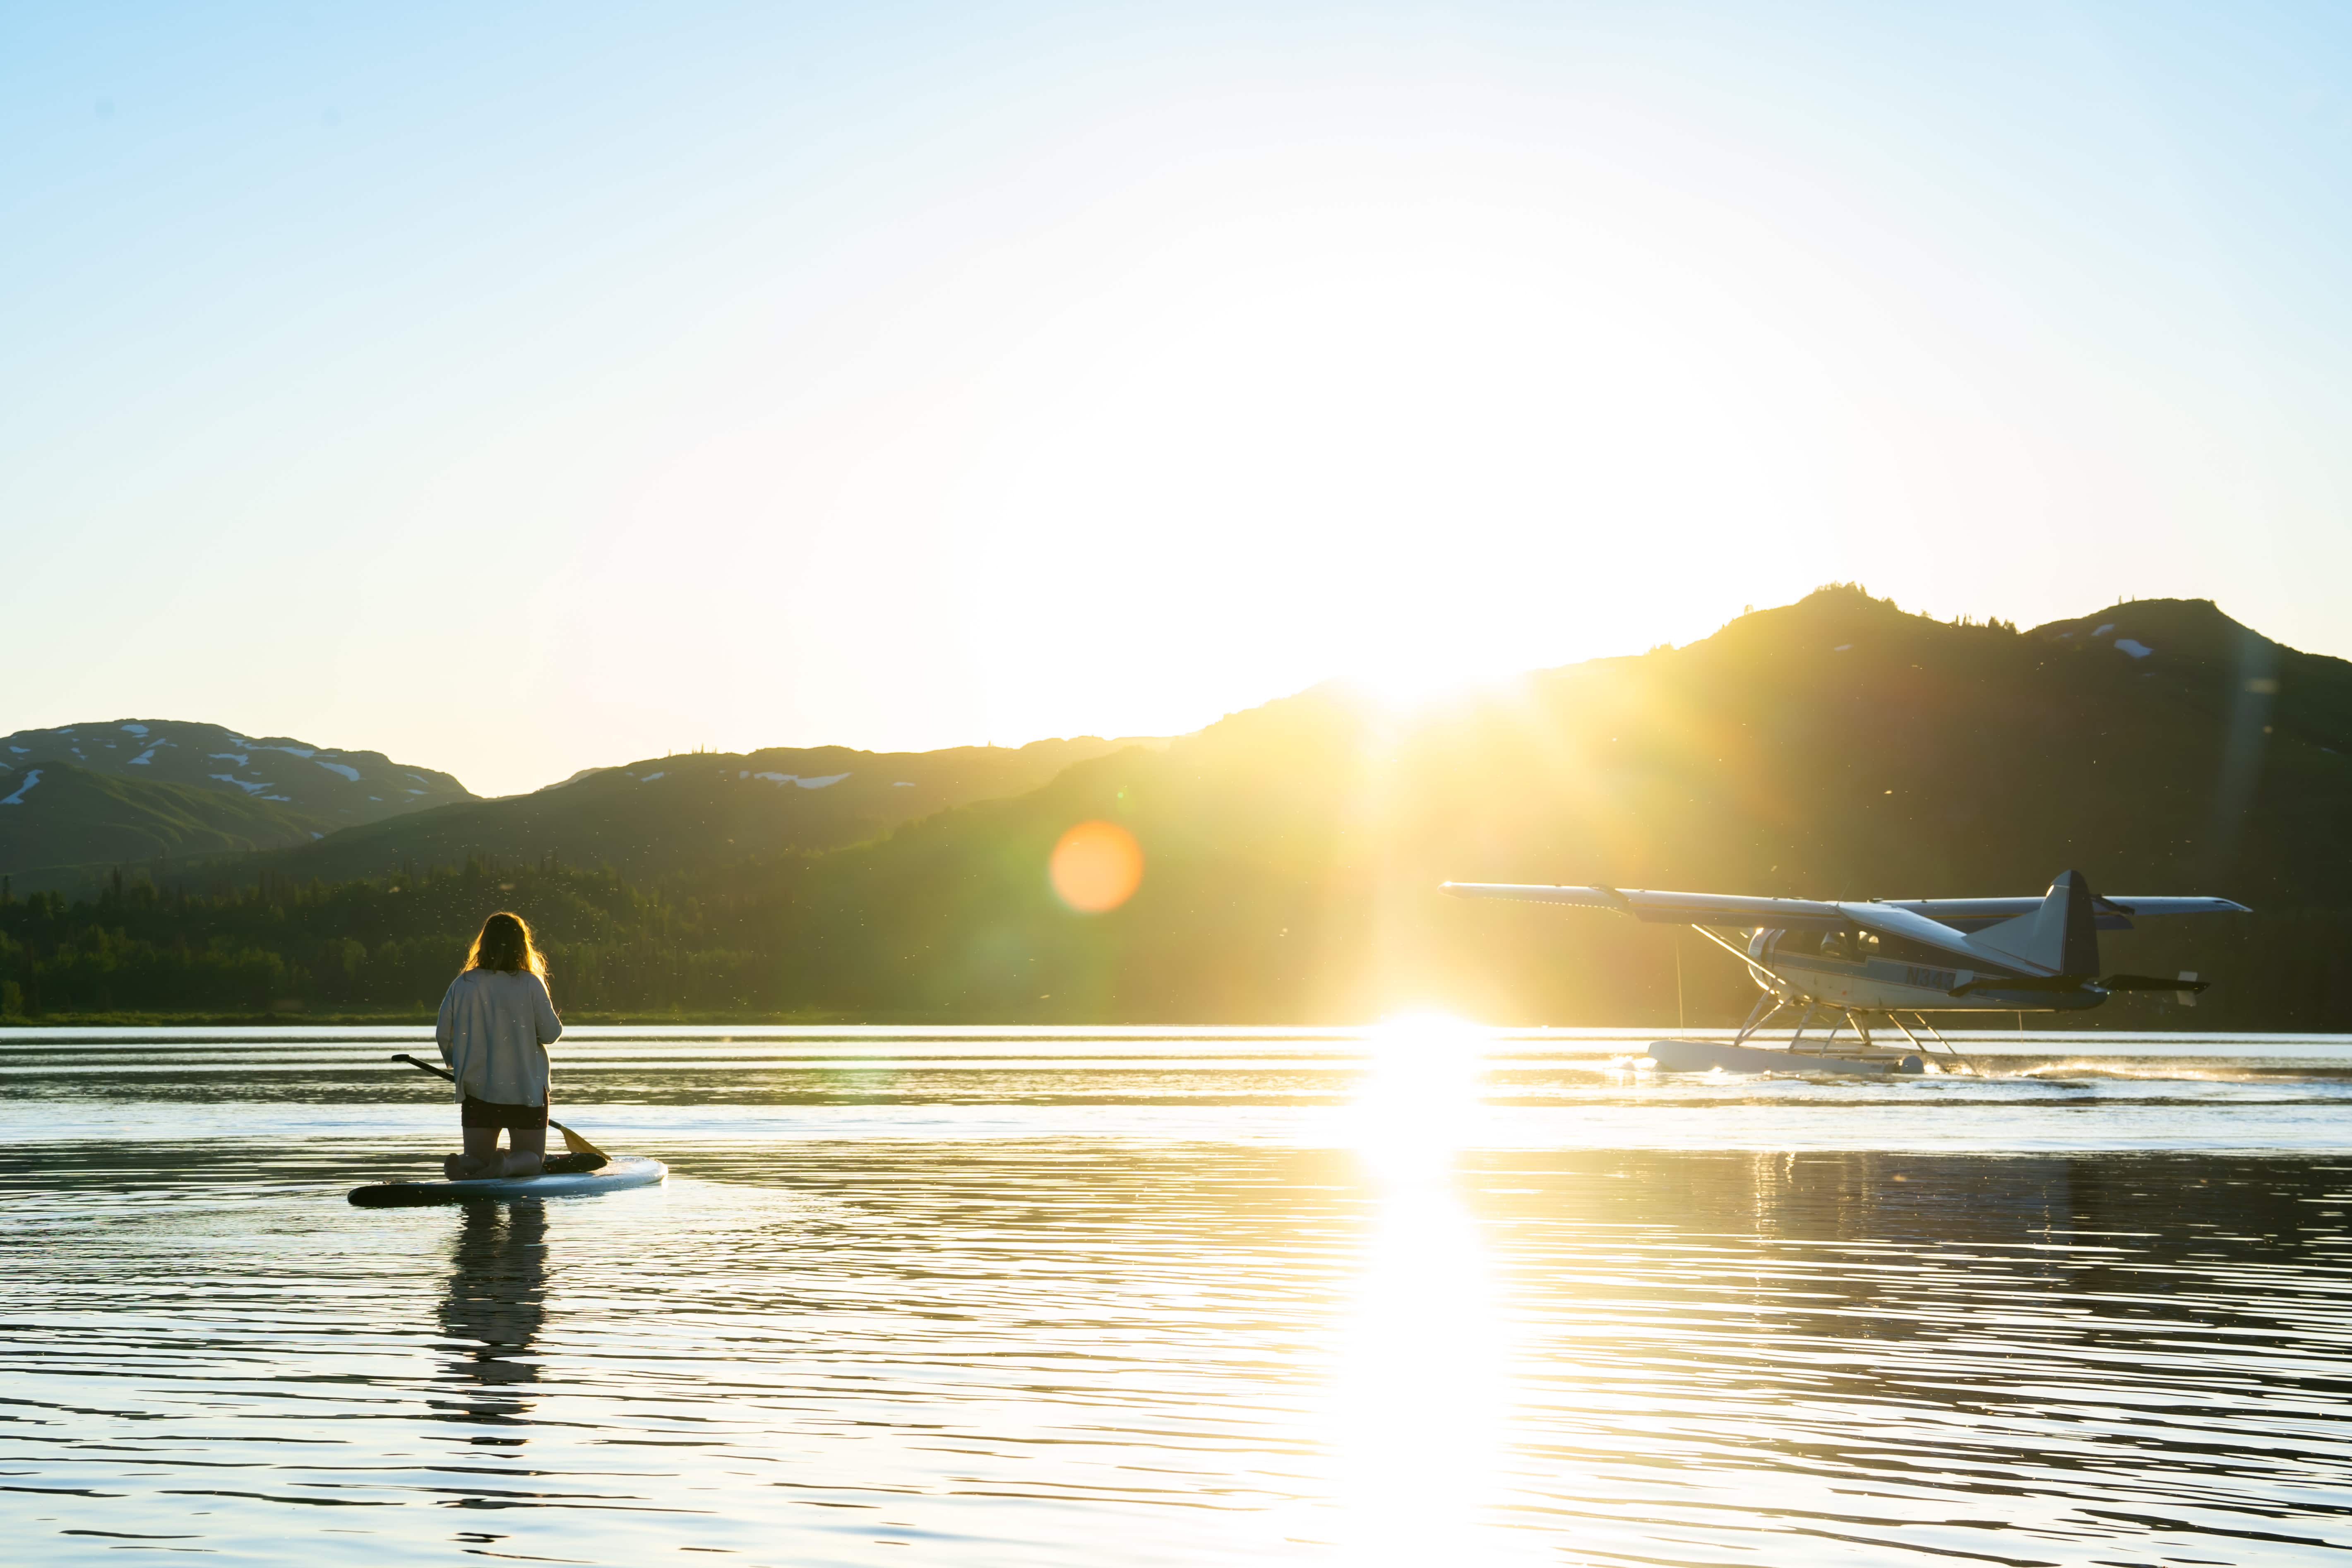 paddle boarding at sunset with an airplane on judd lake